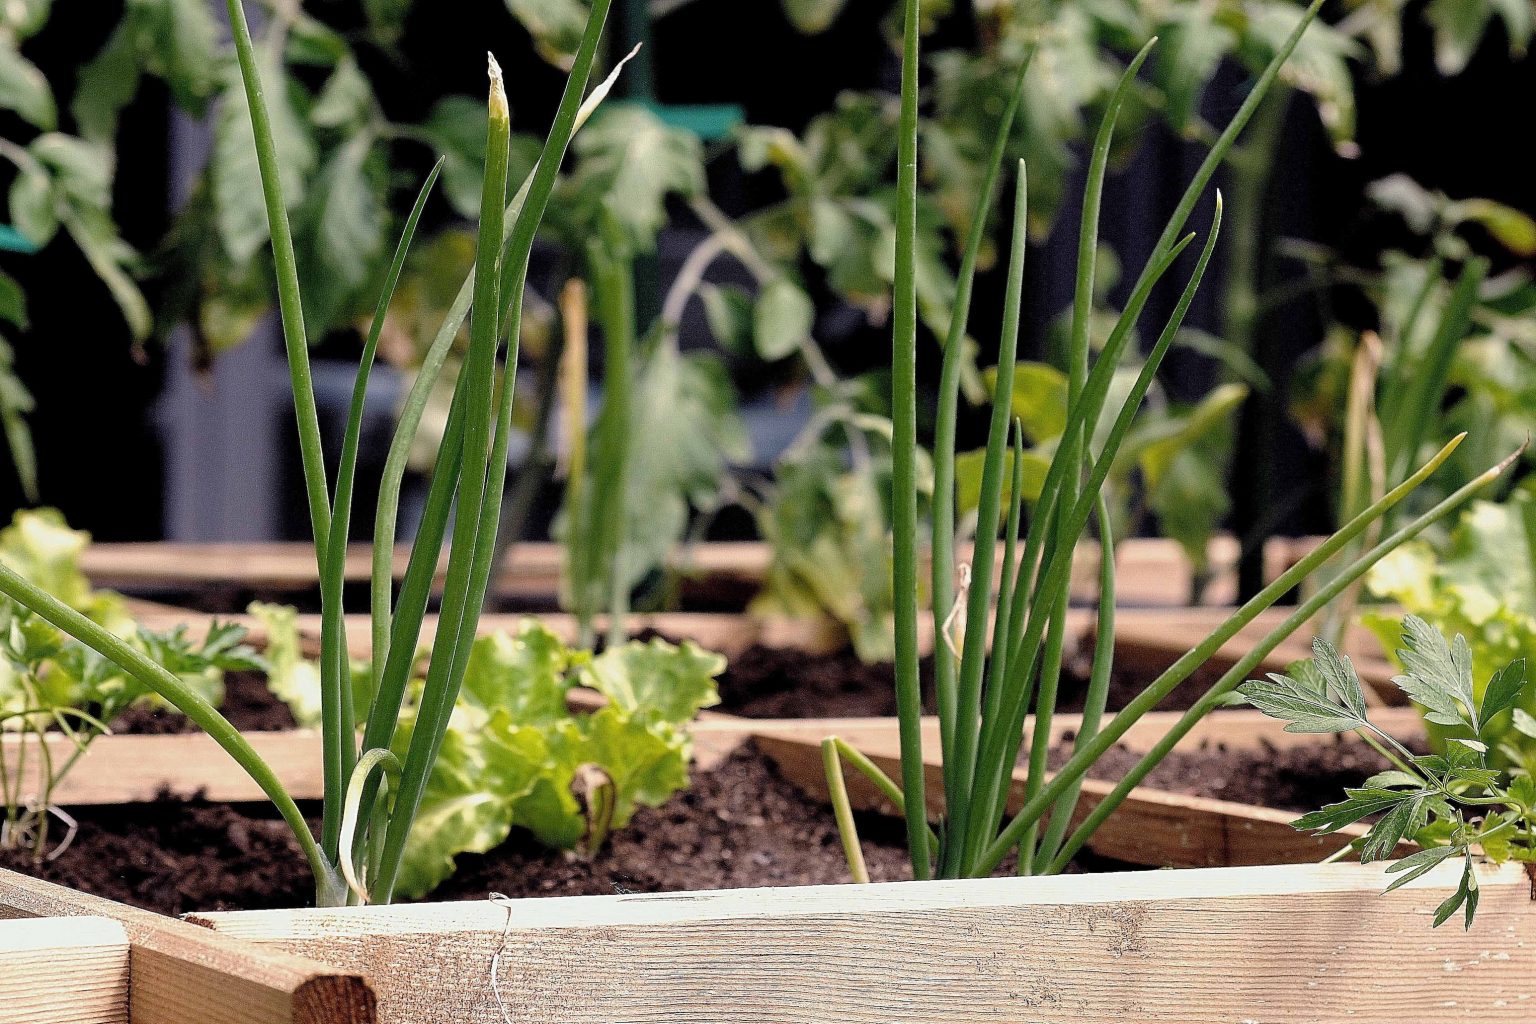 Close up view of vegetables growing in a raised garden bed